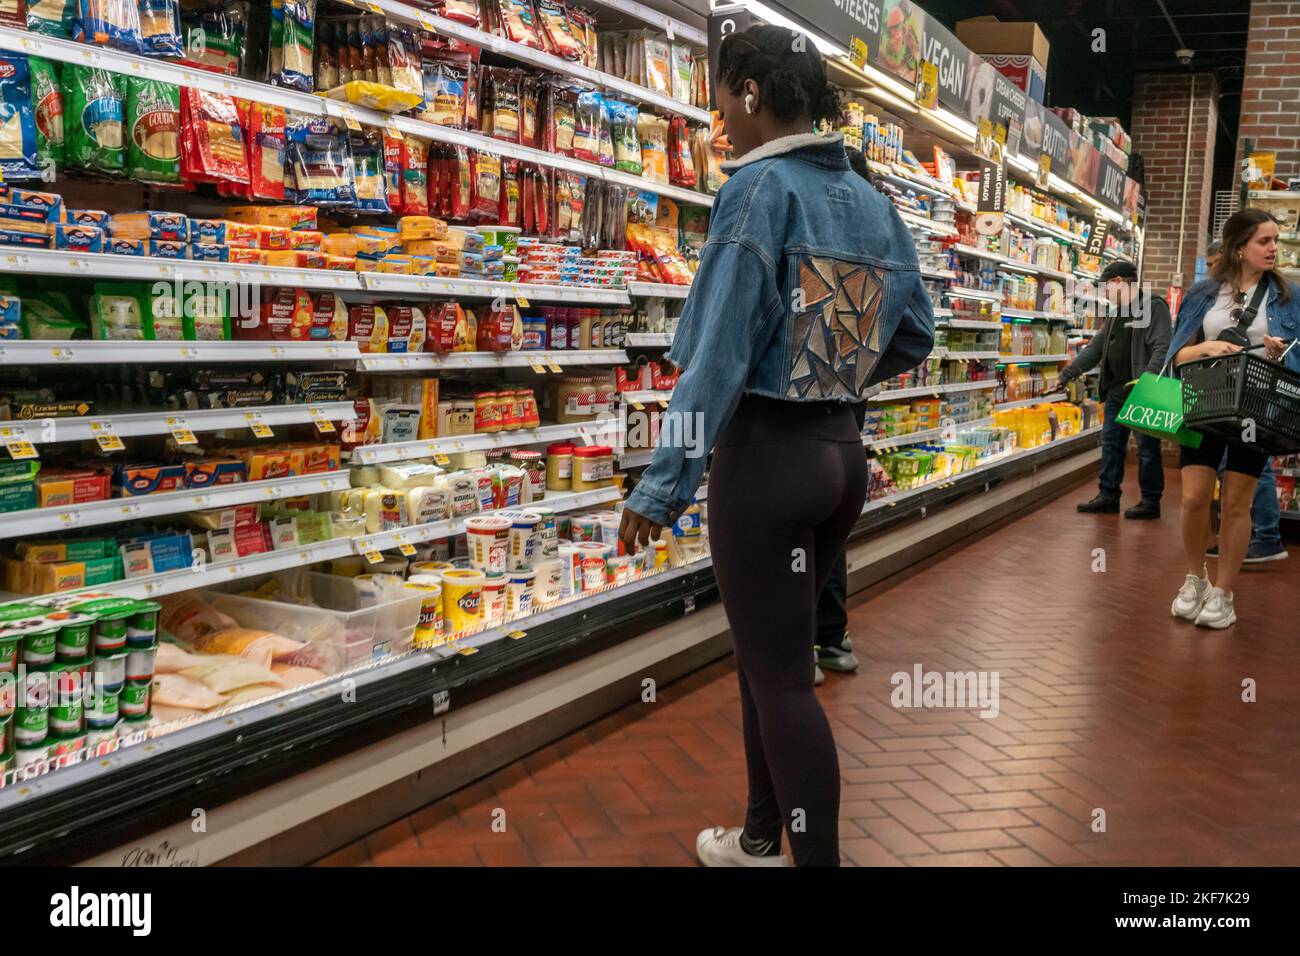 Shoppers in a supermarket in New York on Saturday, November 12, 2022. The U.S. Labor Department reported that inflation in October dropped to 7.7%. (© Richard B. Levine) Stock Photo